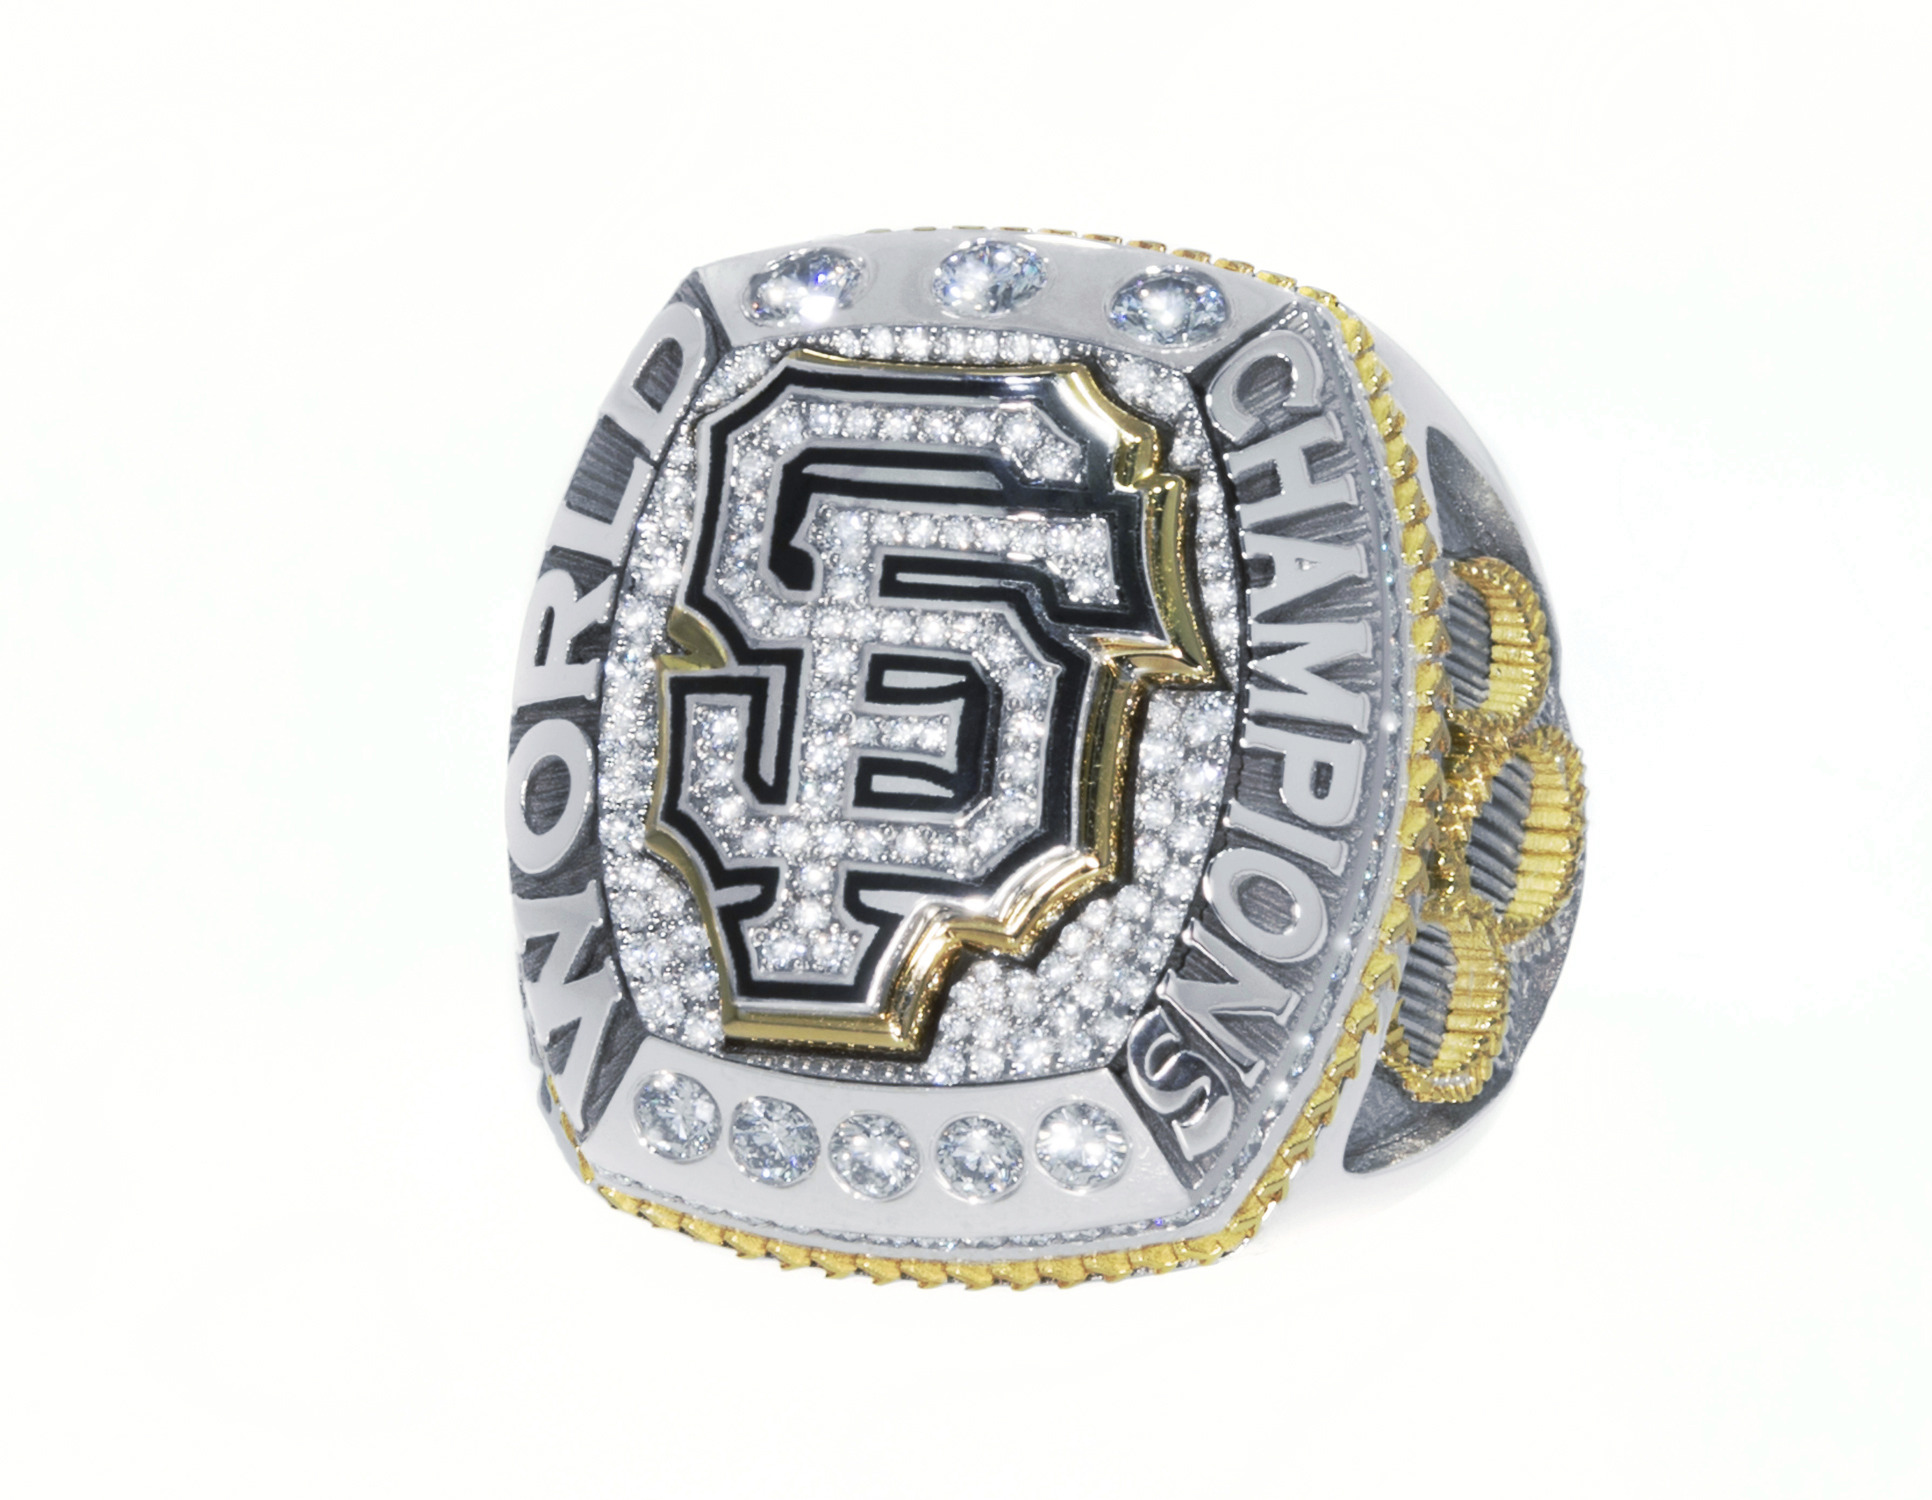 Gold Edition SF Giants Uniform for the 2014 Ring Ceremony